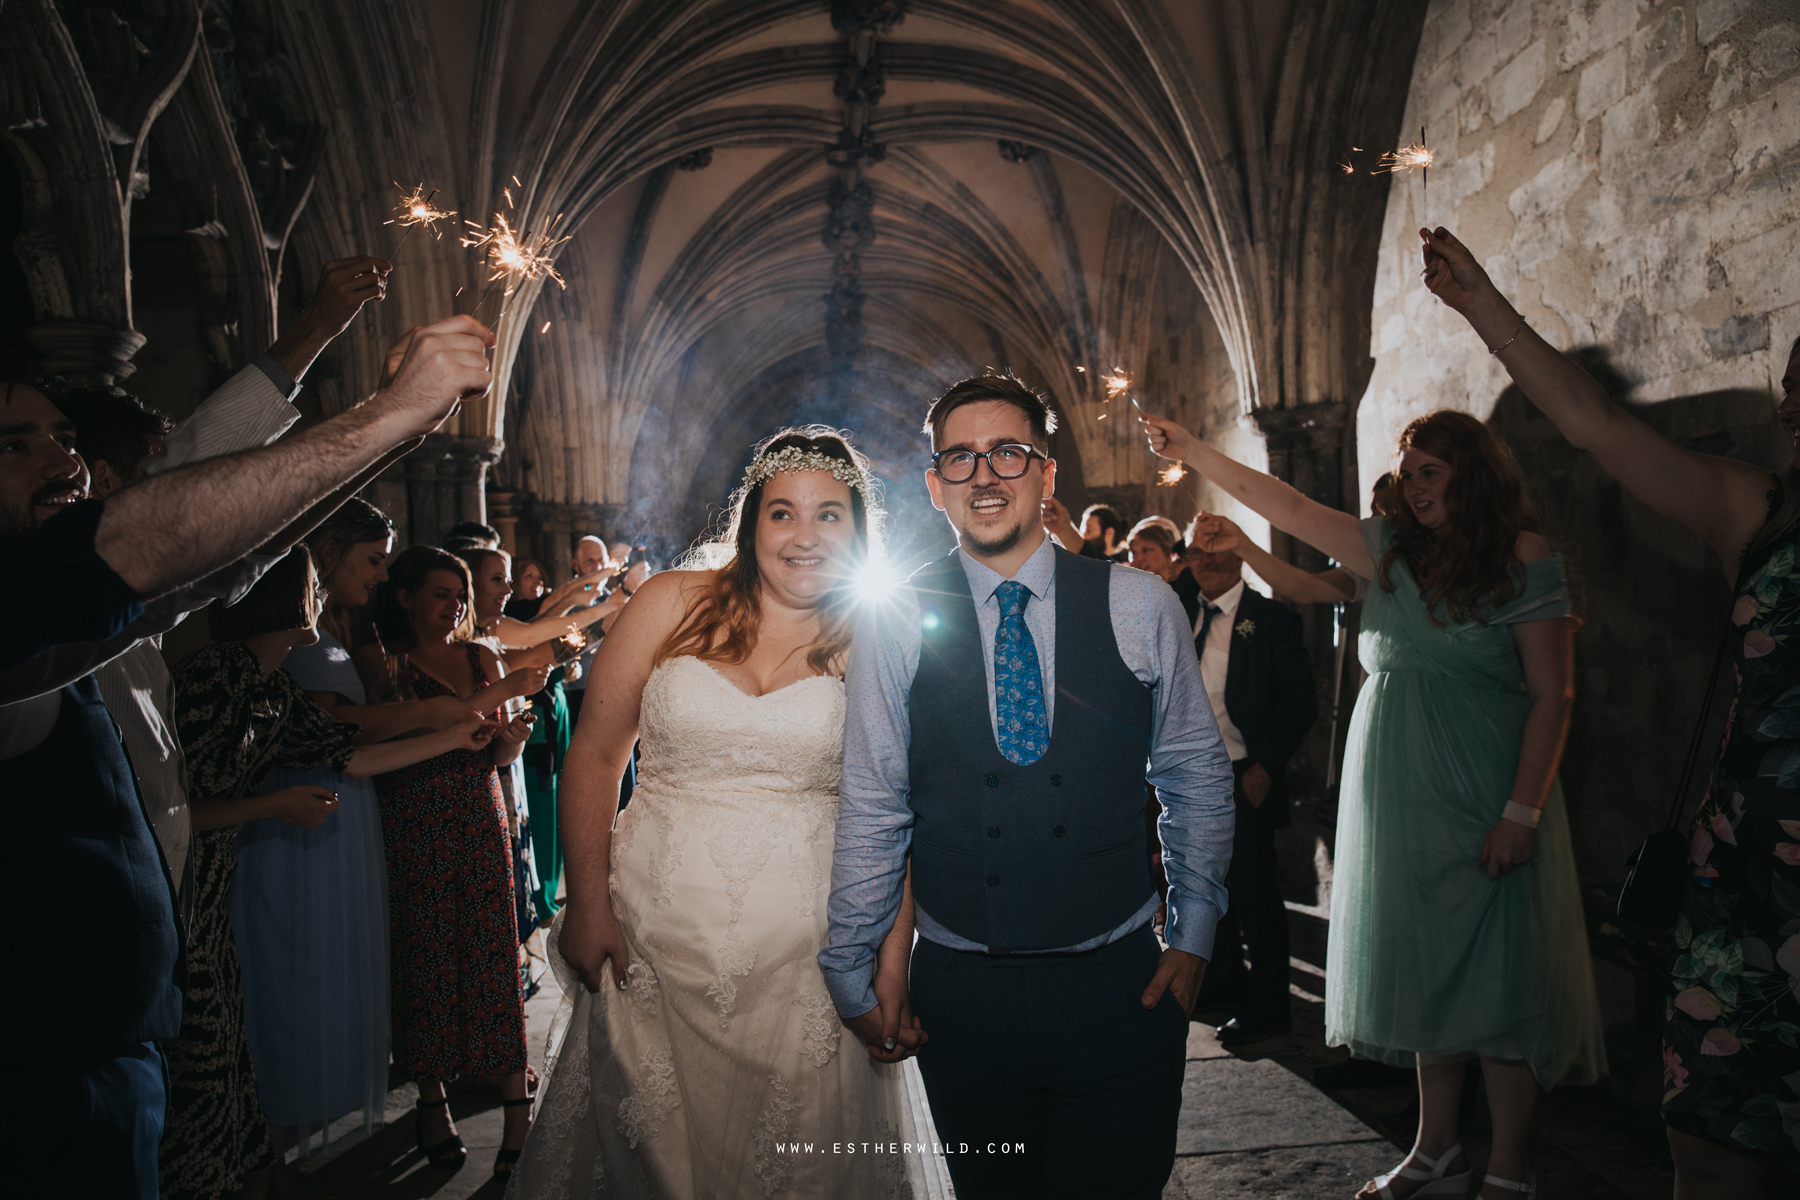 Norwich_Castle_Arcade_Grosvenor_Chip_Birdcage_Cathedral_Cloisters_Refectory_Wedding_Photography_Esther_Wild_Photographer_Norfolk_Kings_Lynn_3R8A3640.jpg